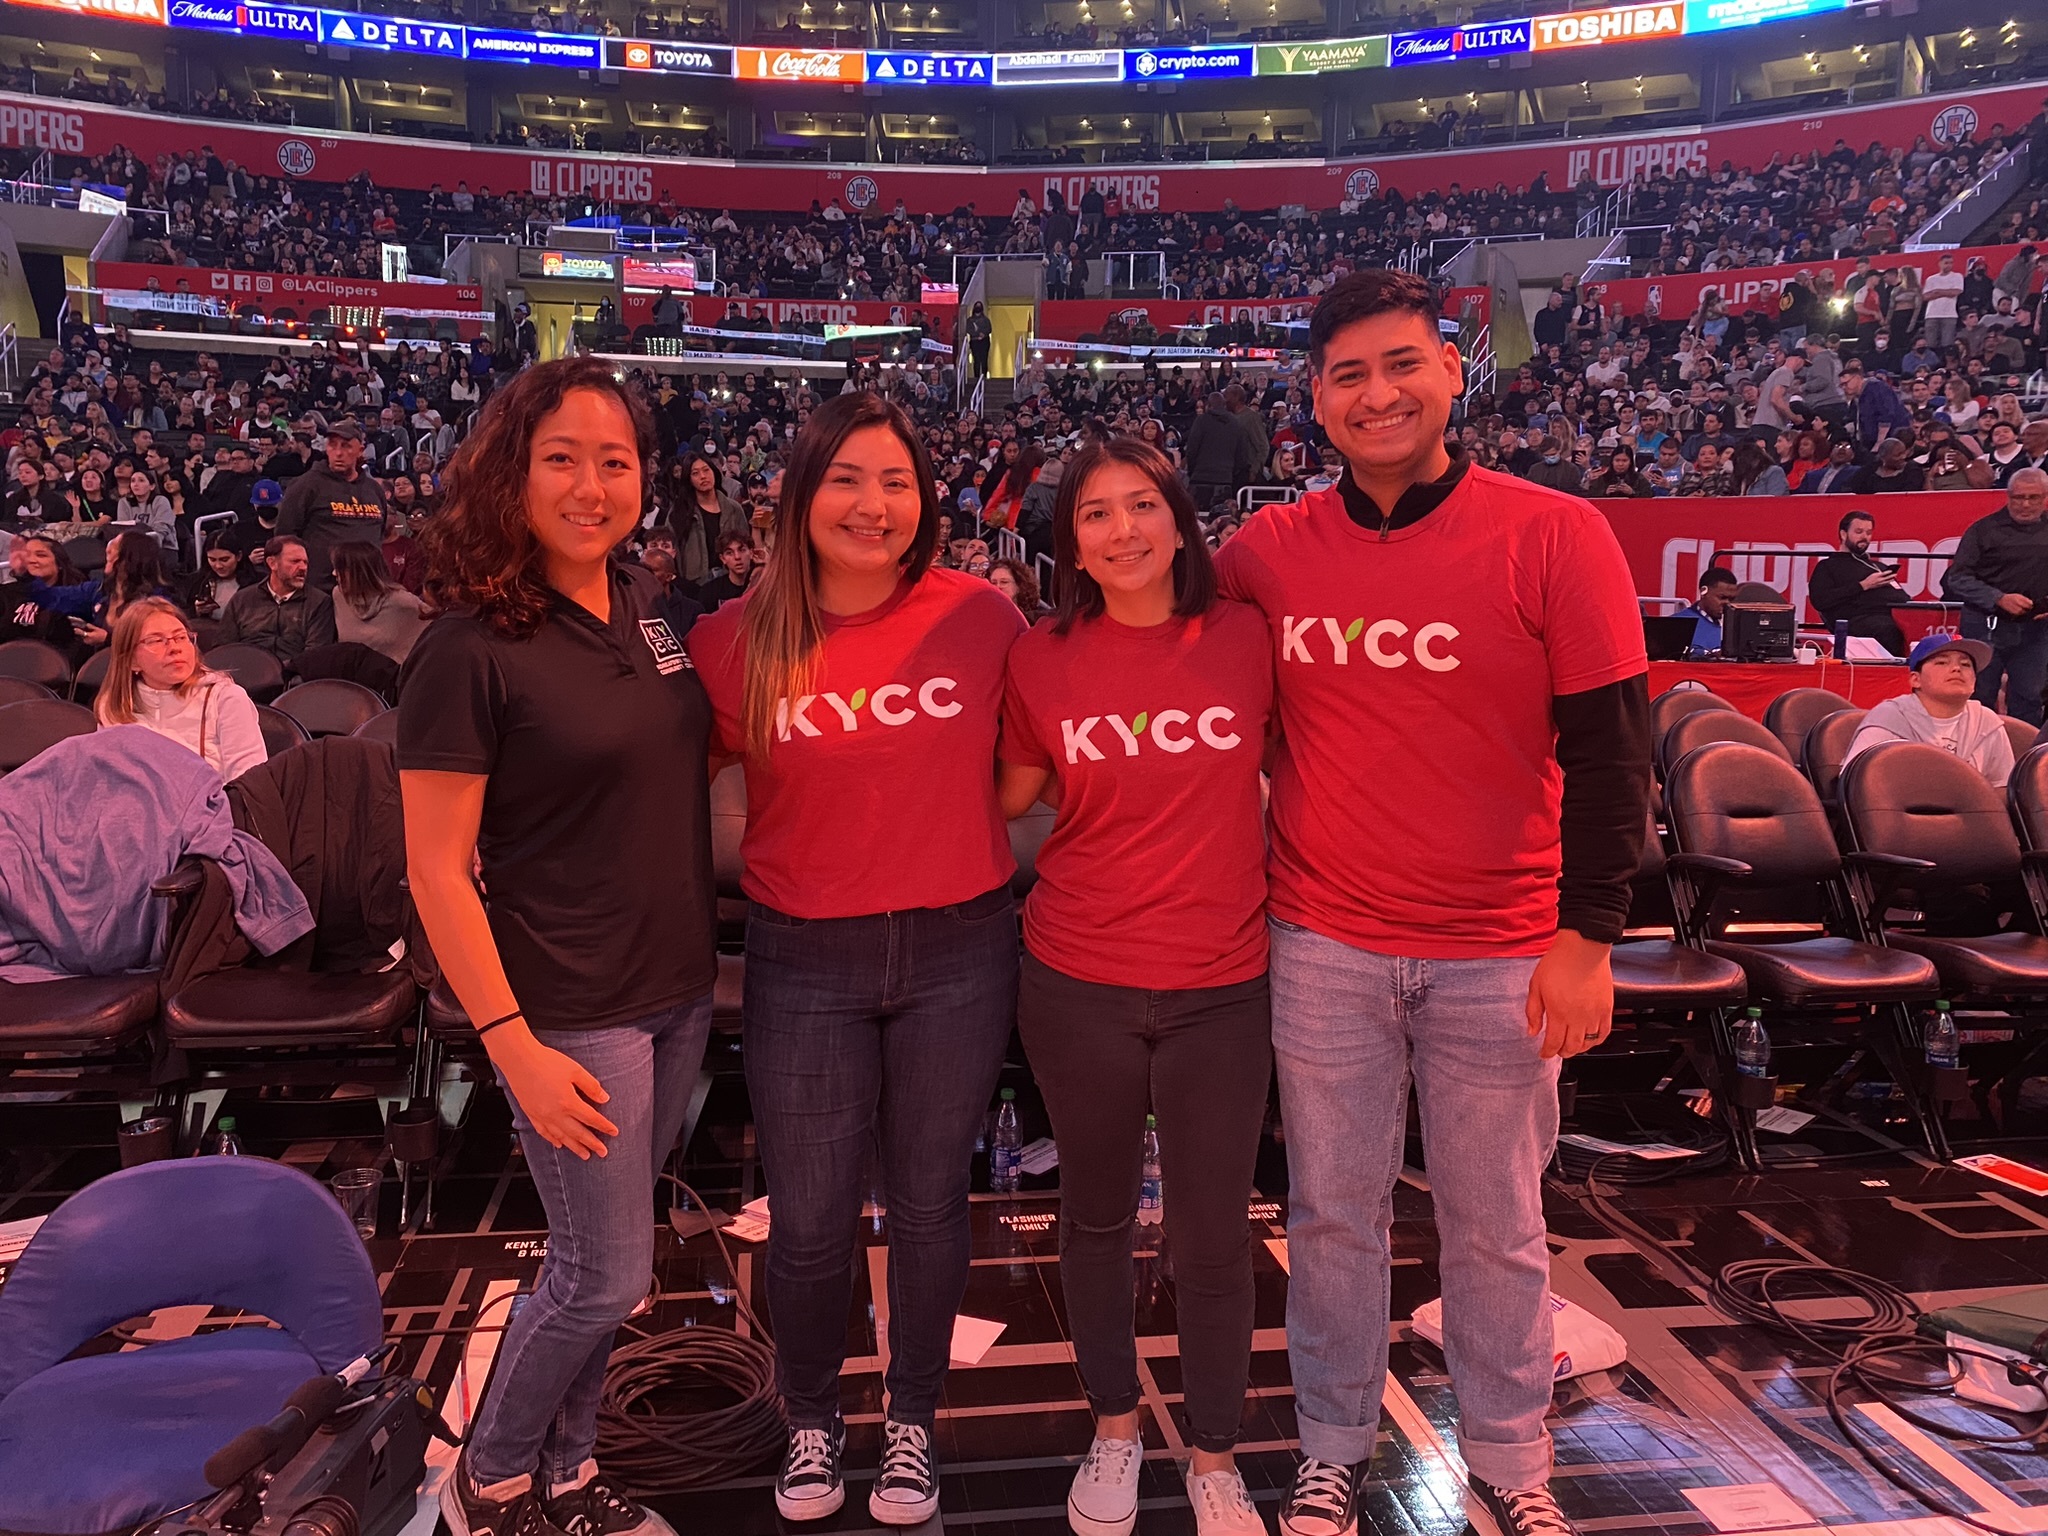 L.A. Clippers - #ClipperNation, celebrate Korean Heritage Night